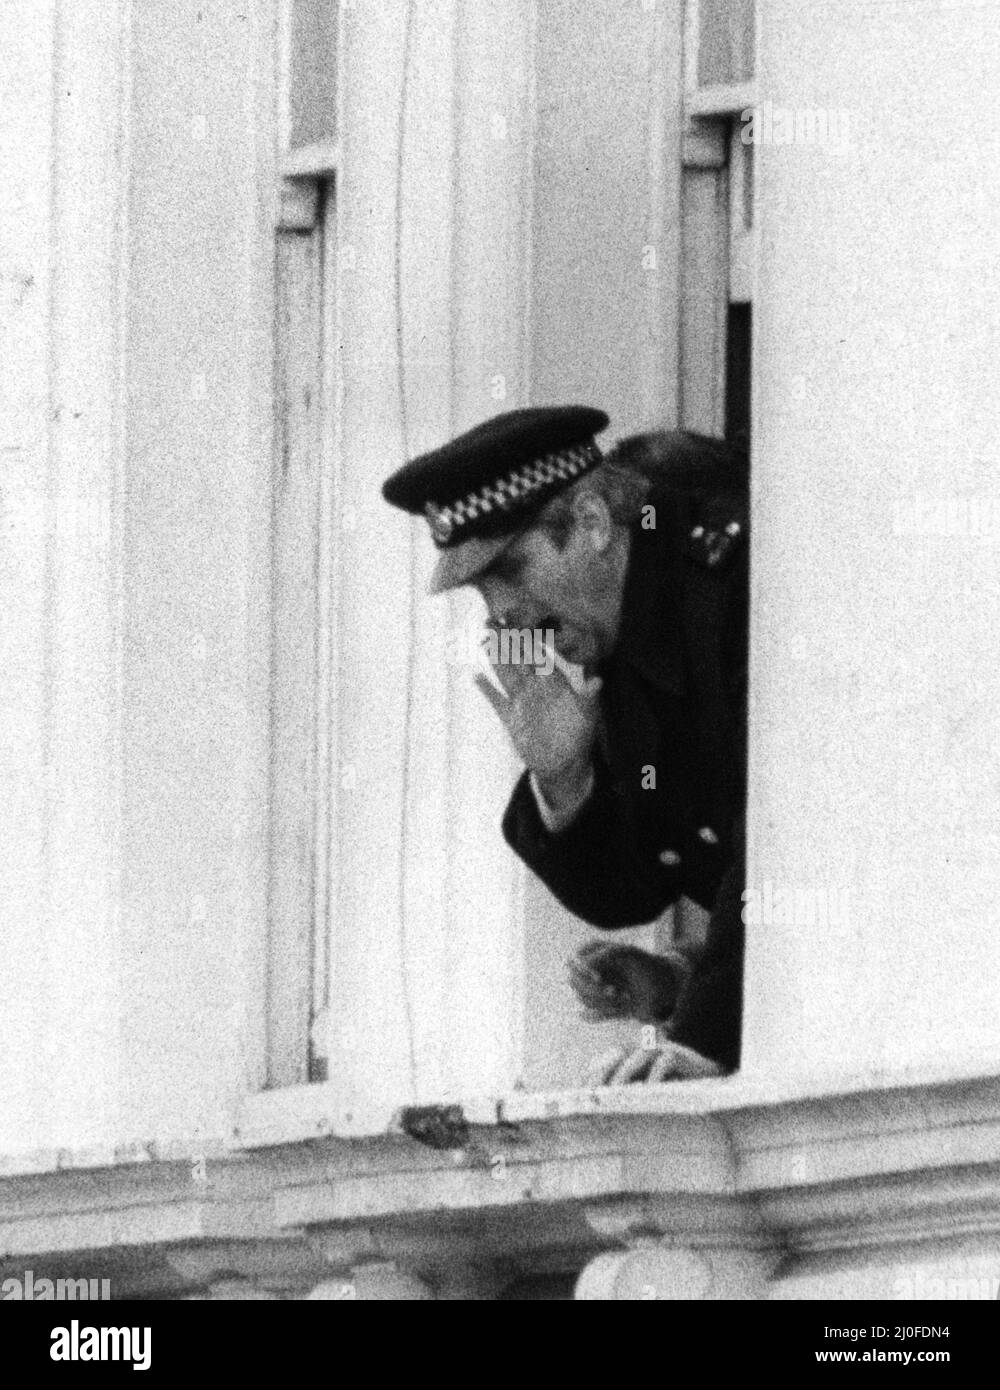 Fifth day of the Iranian Embassy Siege in London where six gunmen of the Iranian extremist group 'Democratic Revolutionary Movement for the Liberation of Arabistan' stormed the building, taking 26 hostages before the SAS retook the embassy and freed the hostages. Hostage policeman Trevor Lock shouts instructions down to police officers below from the Embassy balcony. 4th May 1980. Stock Photo